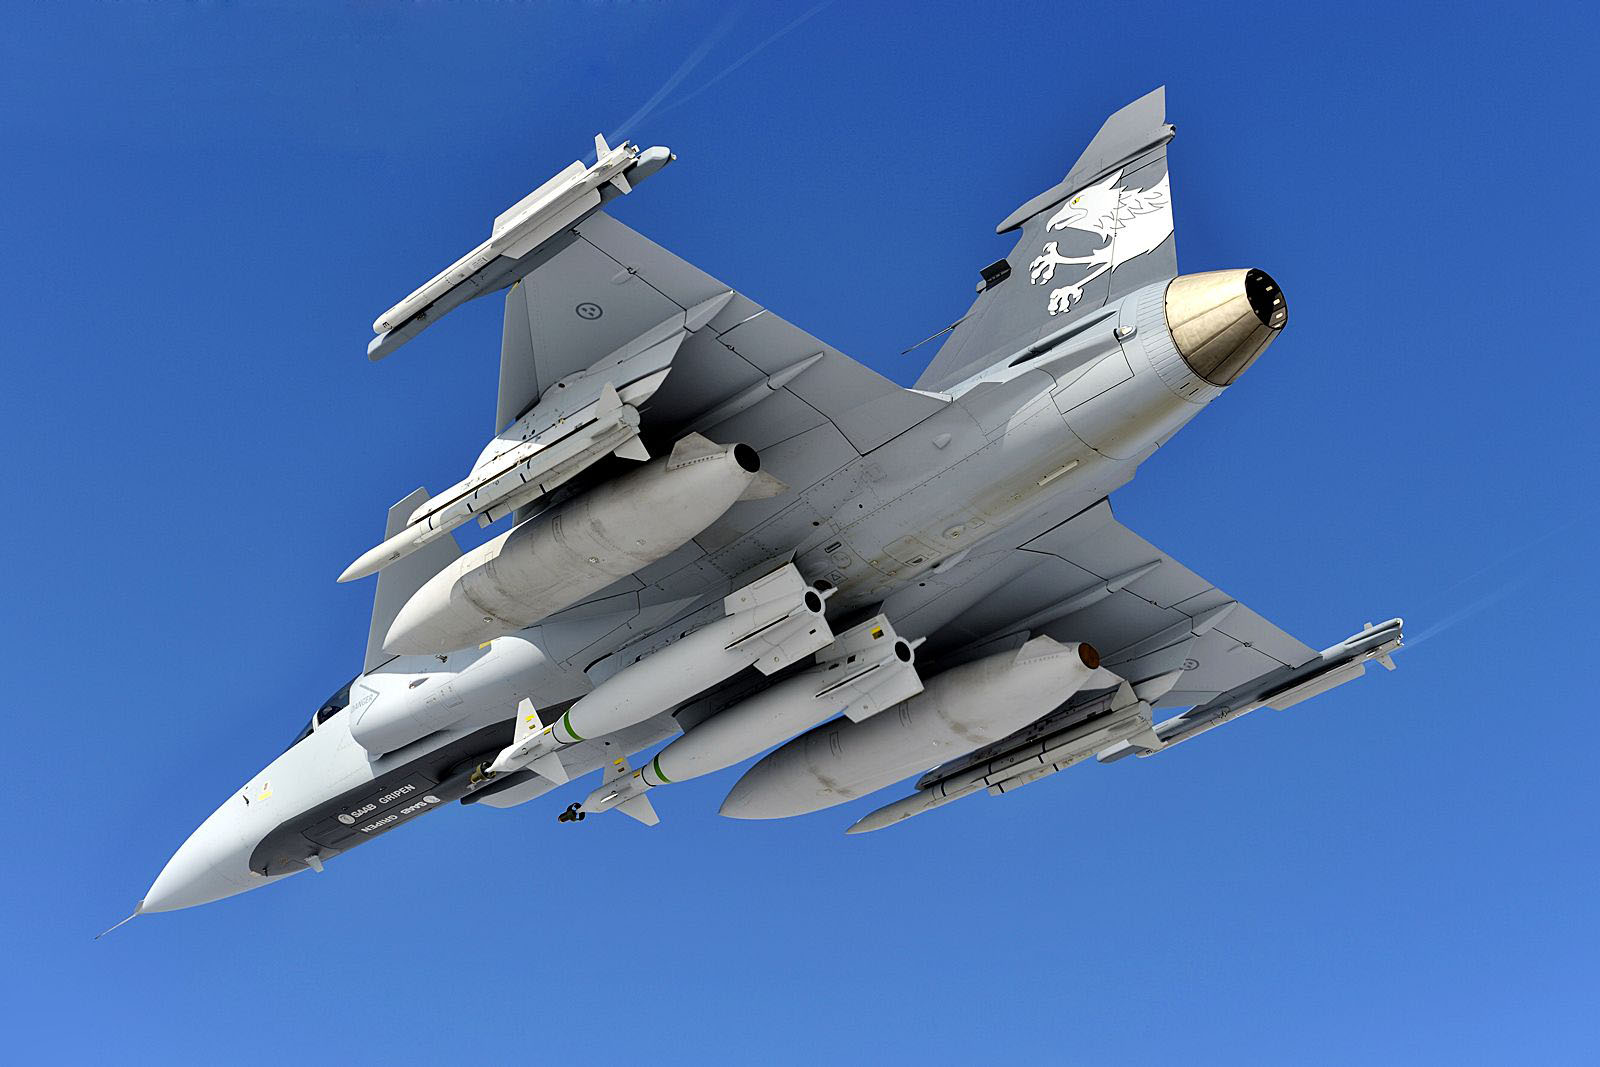 DEFENSE STUDIES: Saab Eyeing Lease of Gripen to Malaysia and a Follow